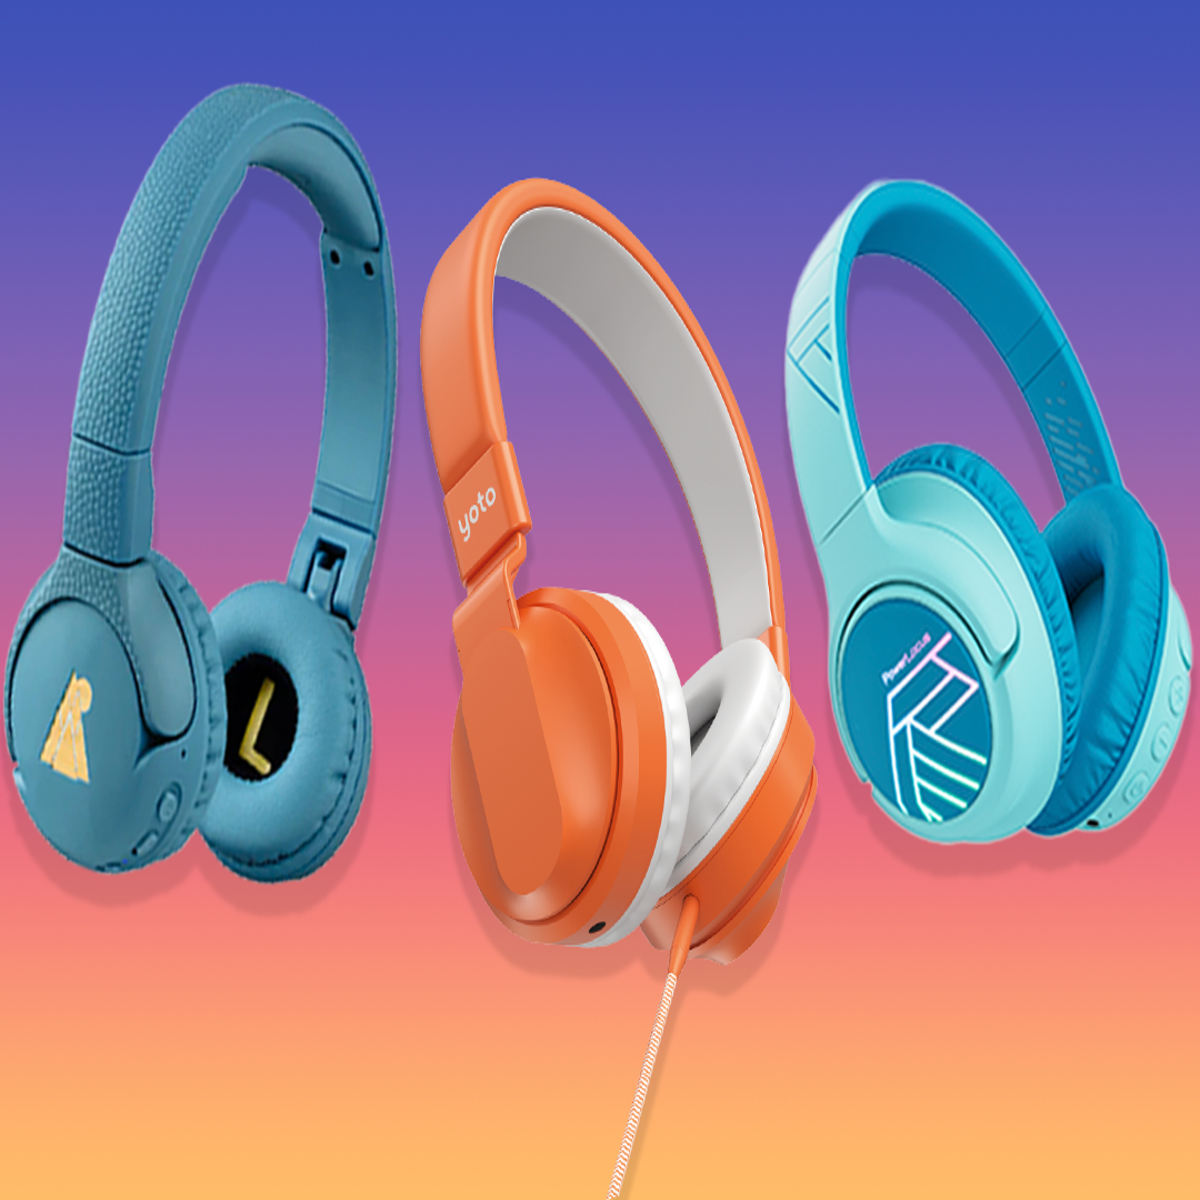 We bought the best-selling headphones on  for £5 and here's